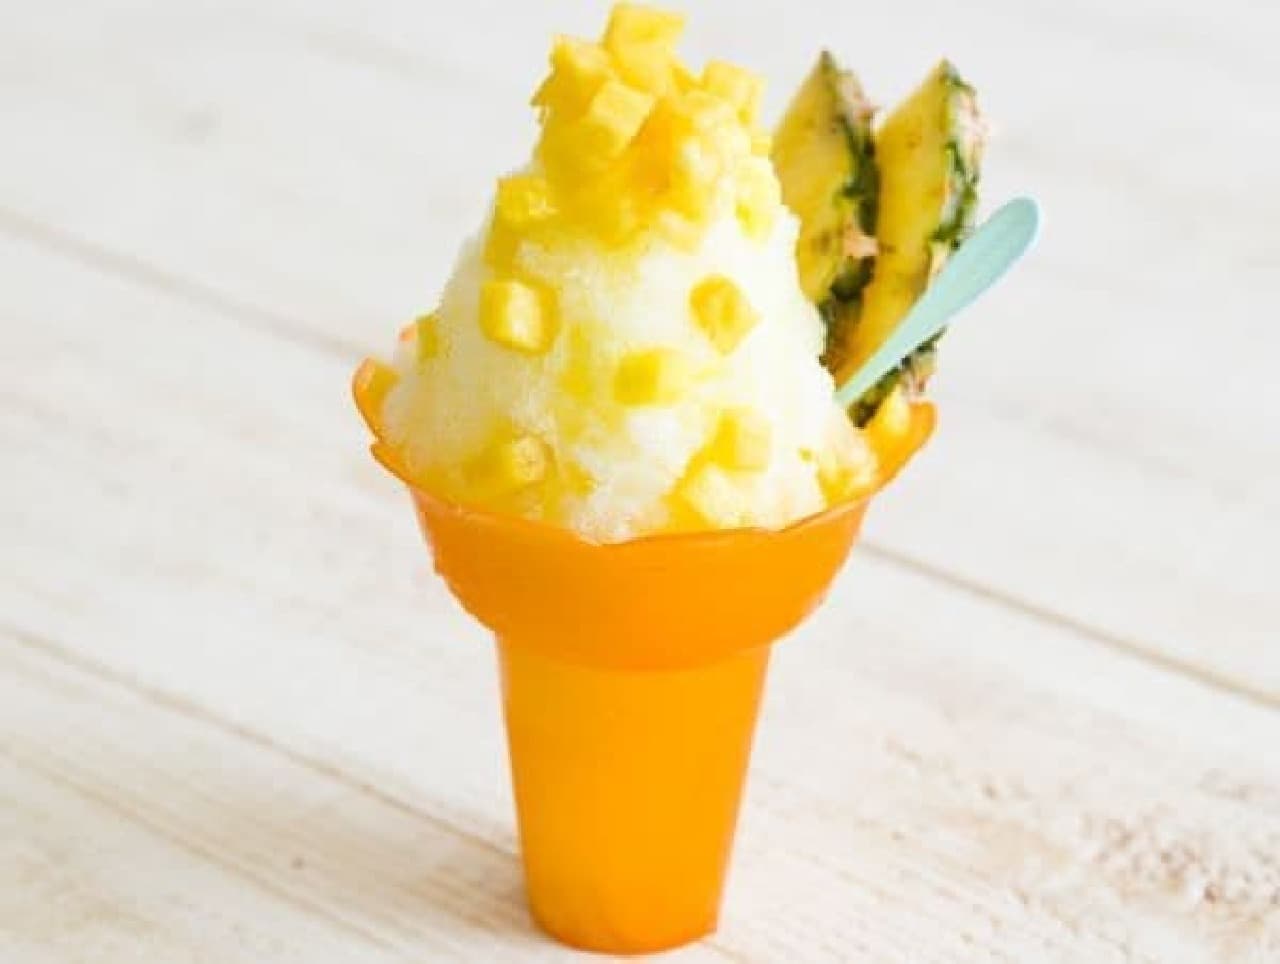 "Pine Shave Ice" is the second of the popular shave ice products.